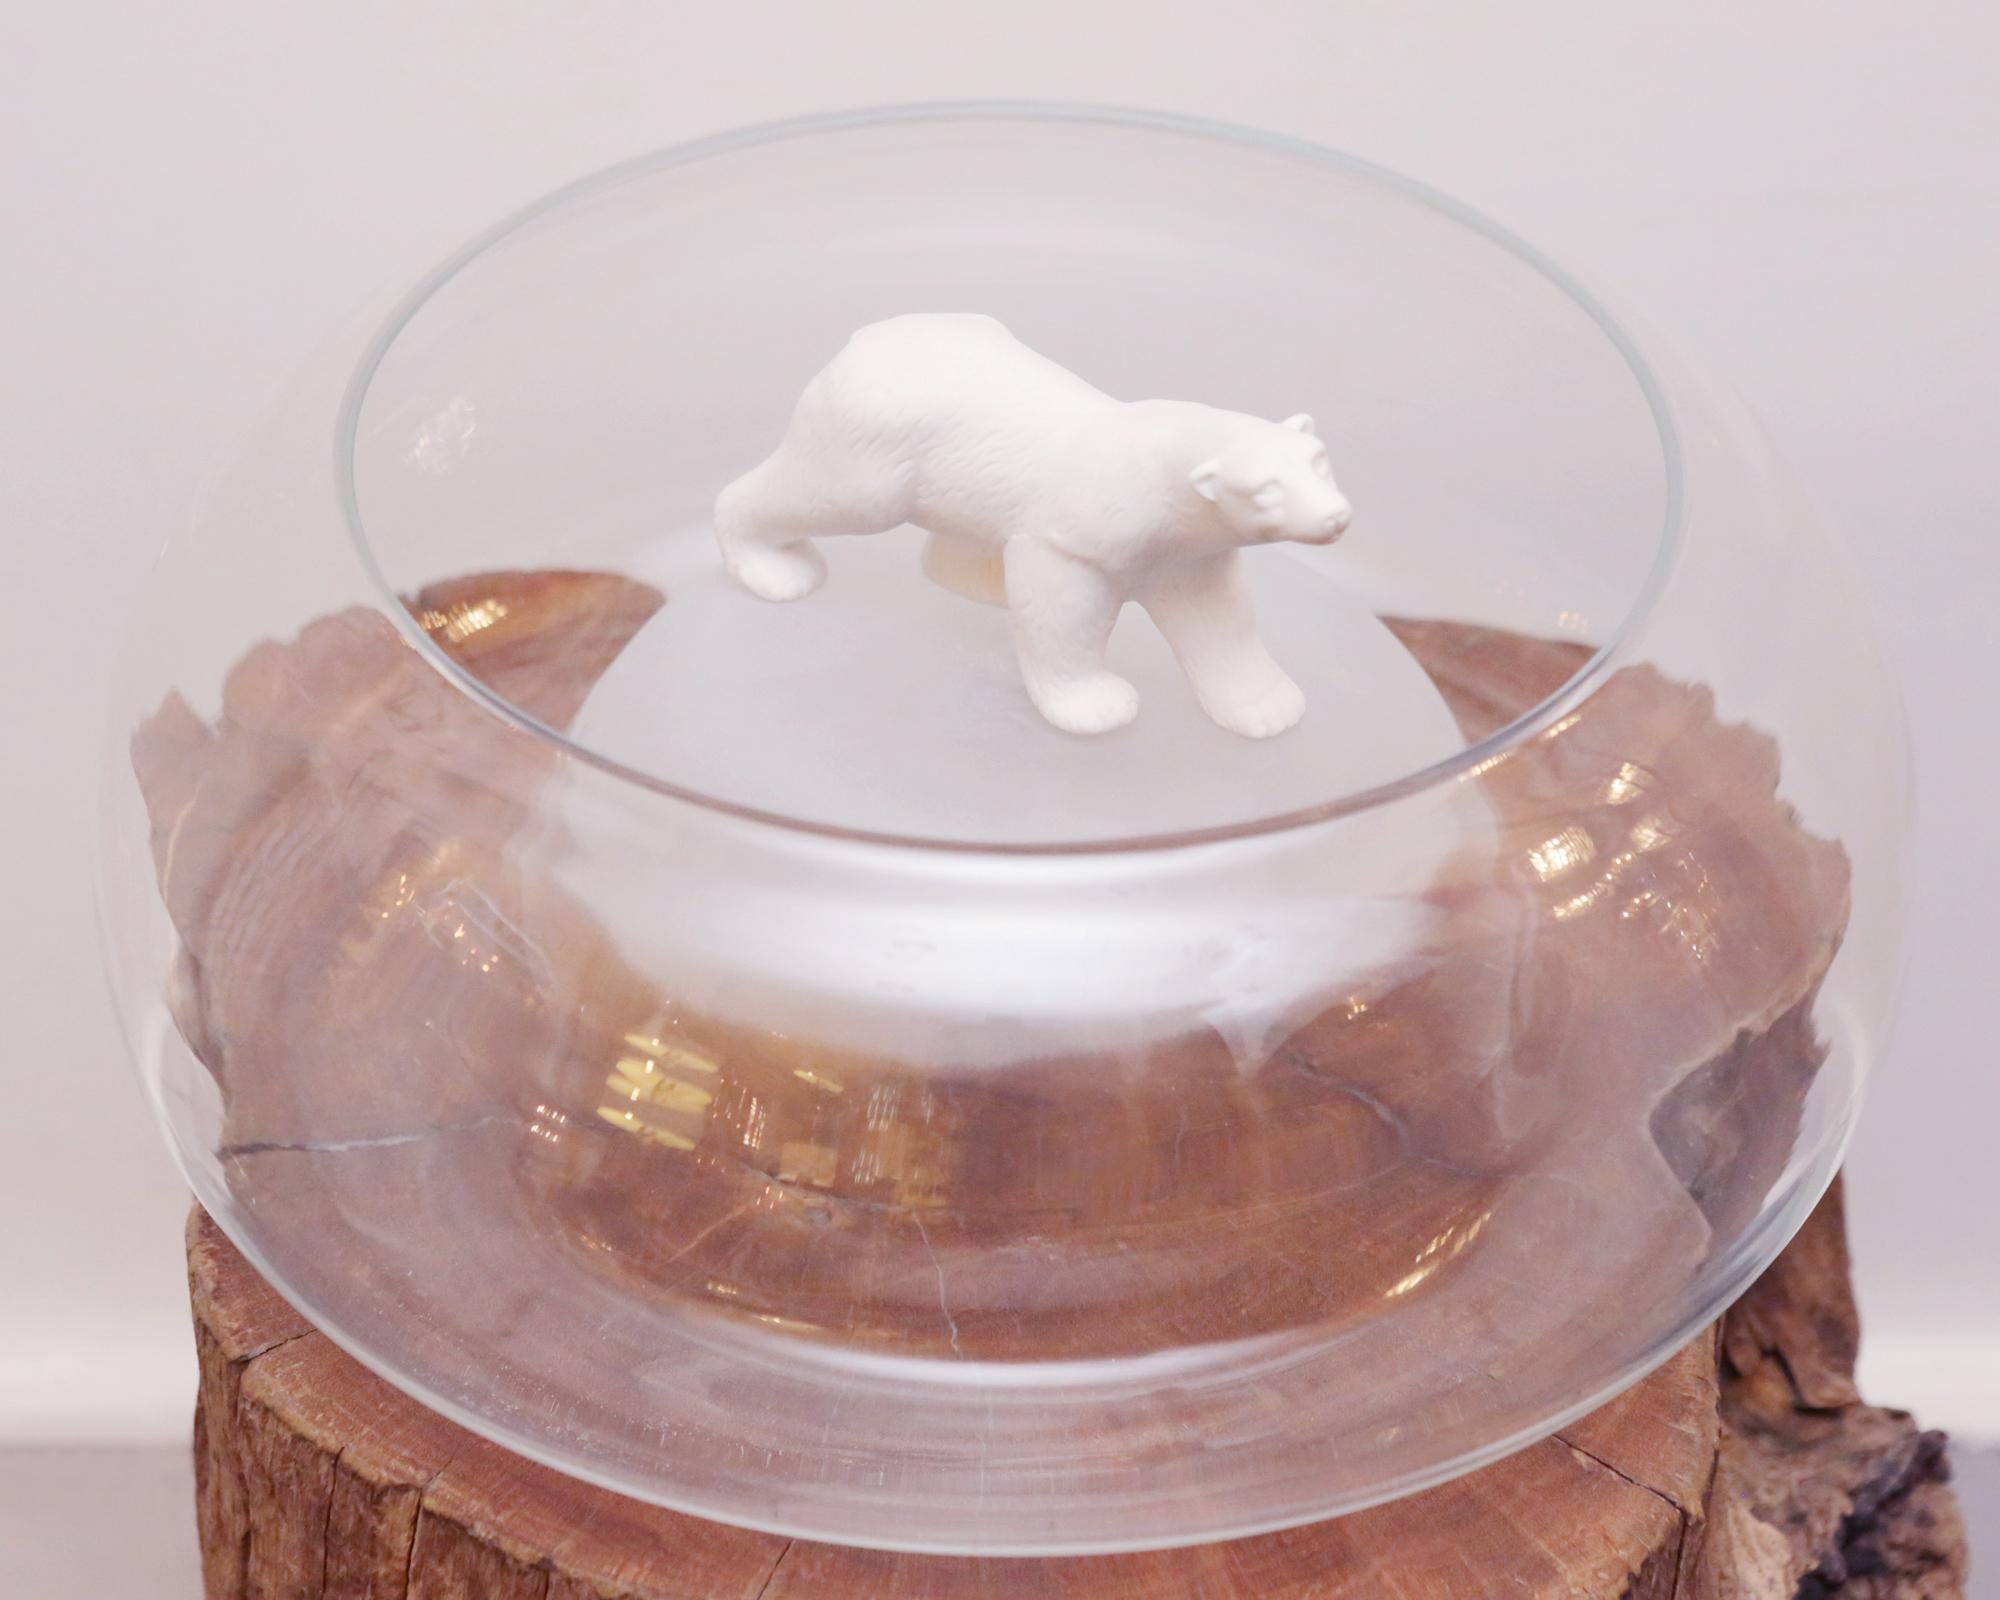 Round Cup Bear with clear glass cup and
with bear in white ceramic.